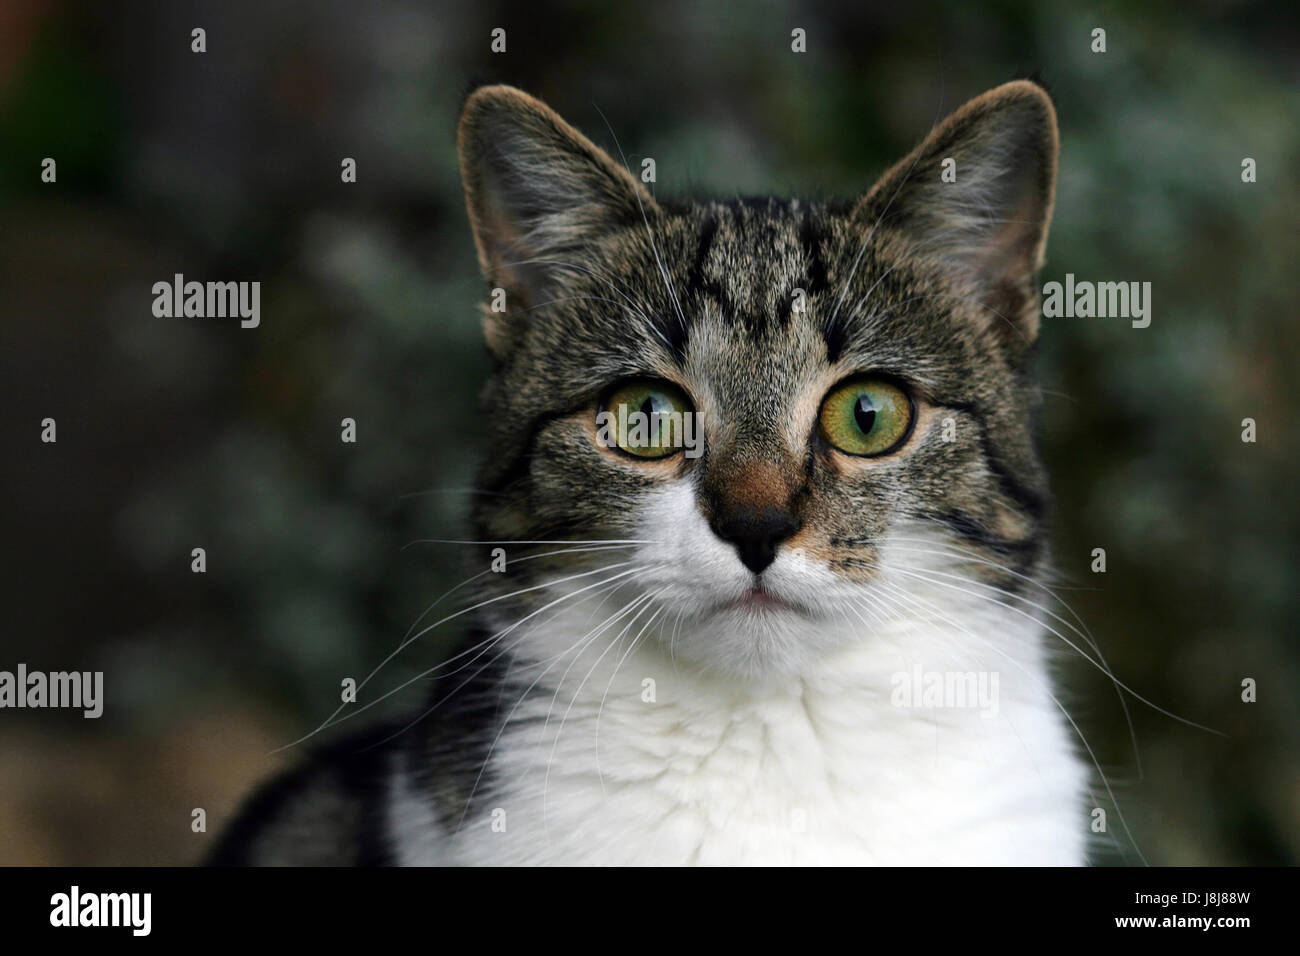 curiosity, curious, nosey, nosy, eyes, look, glancing, see, view, looking, Stock Photo